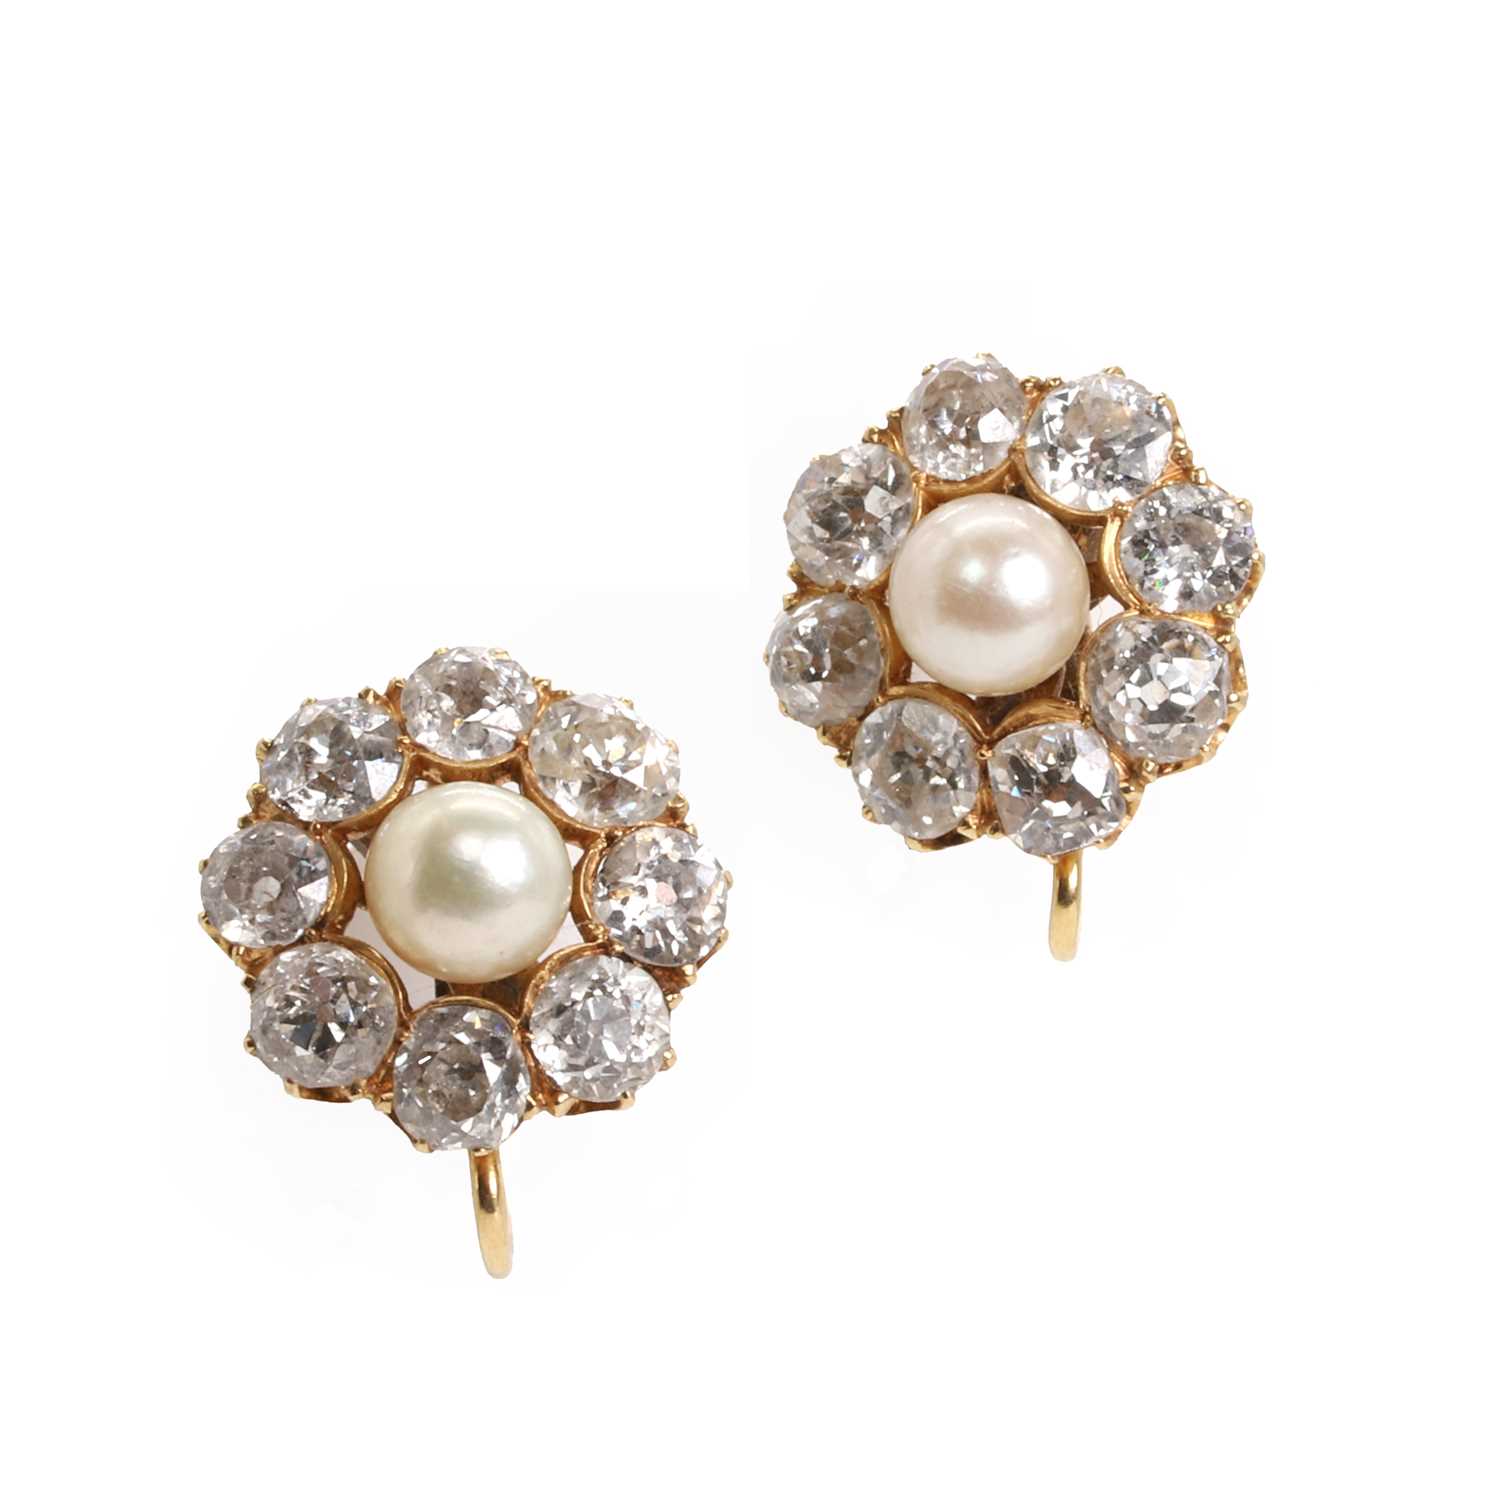 A pair of late Victorian pearl and diamond cluster earrings, c.1880,